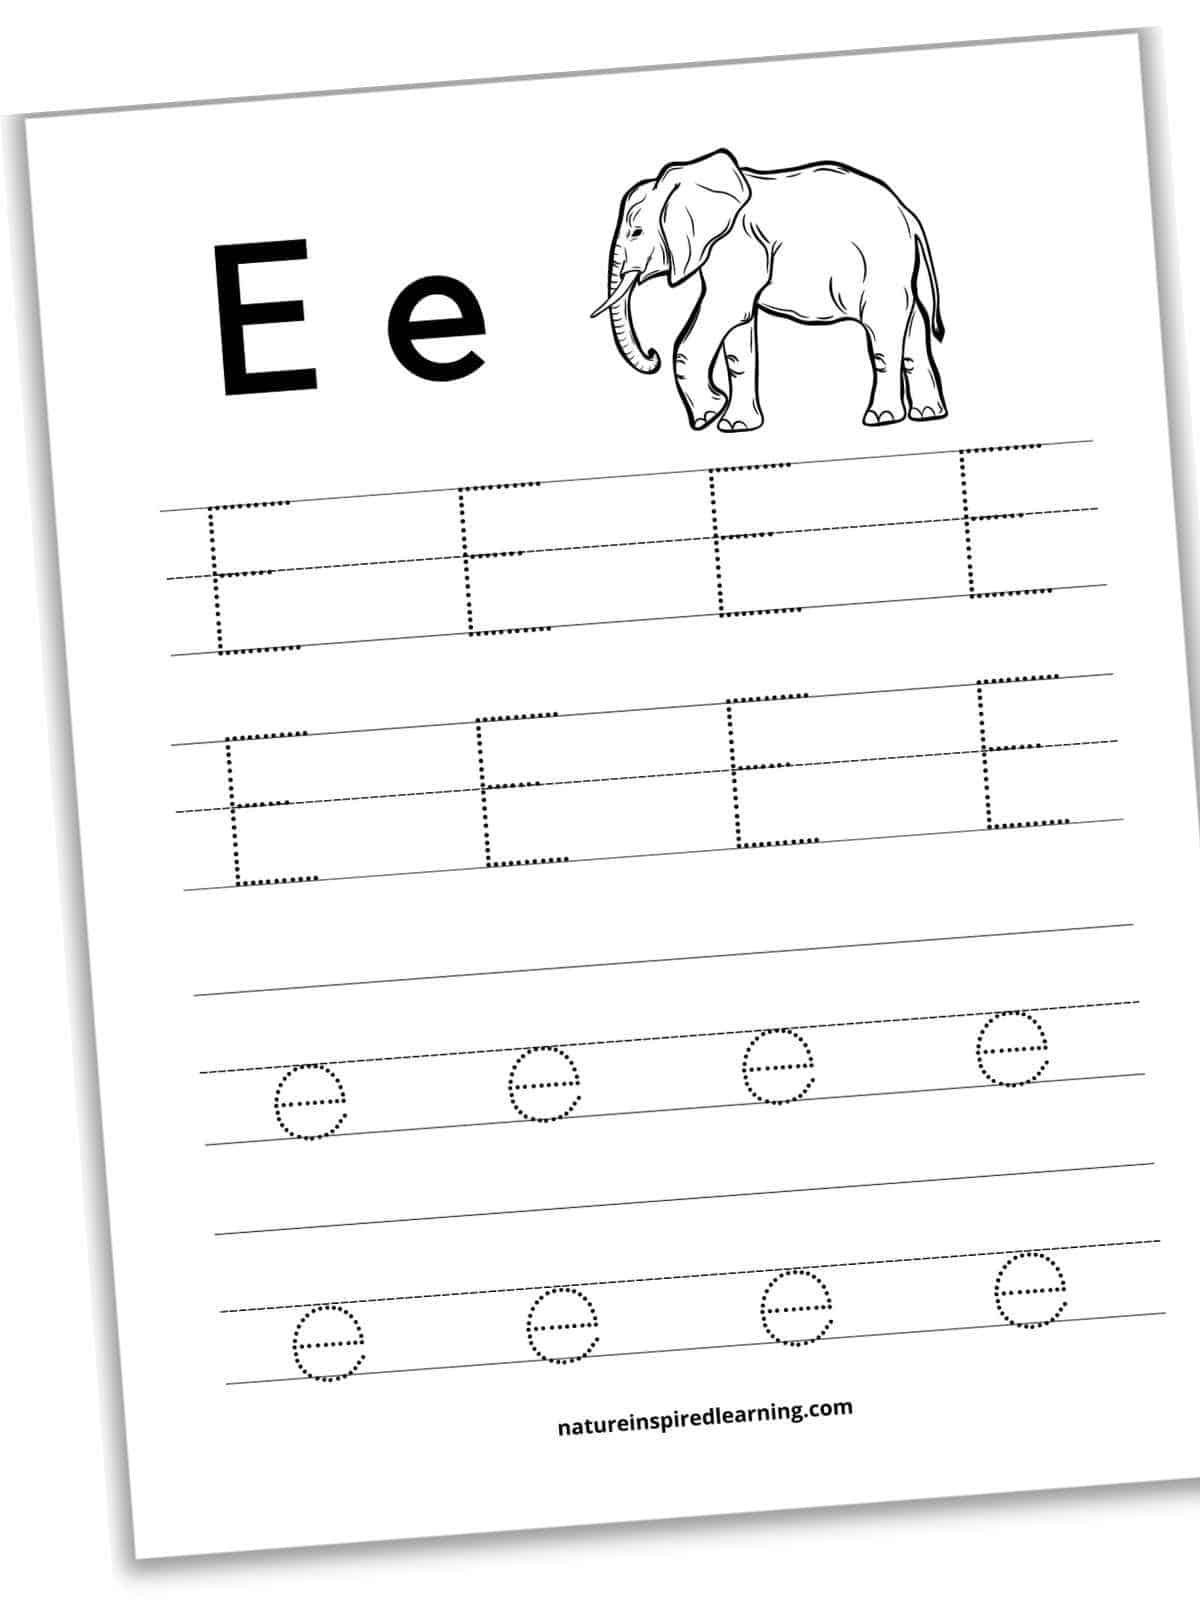 Worksheet with traceable capital and lowercase letter E's. Two lines with four capital E's on each and two lines with four lowercase letter e's on each. E and e in bold across the top with a black and white image of an elephant. Printable slanted with a drop shadow.